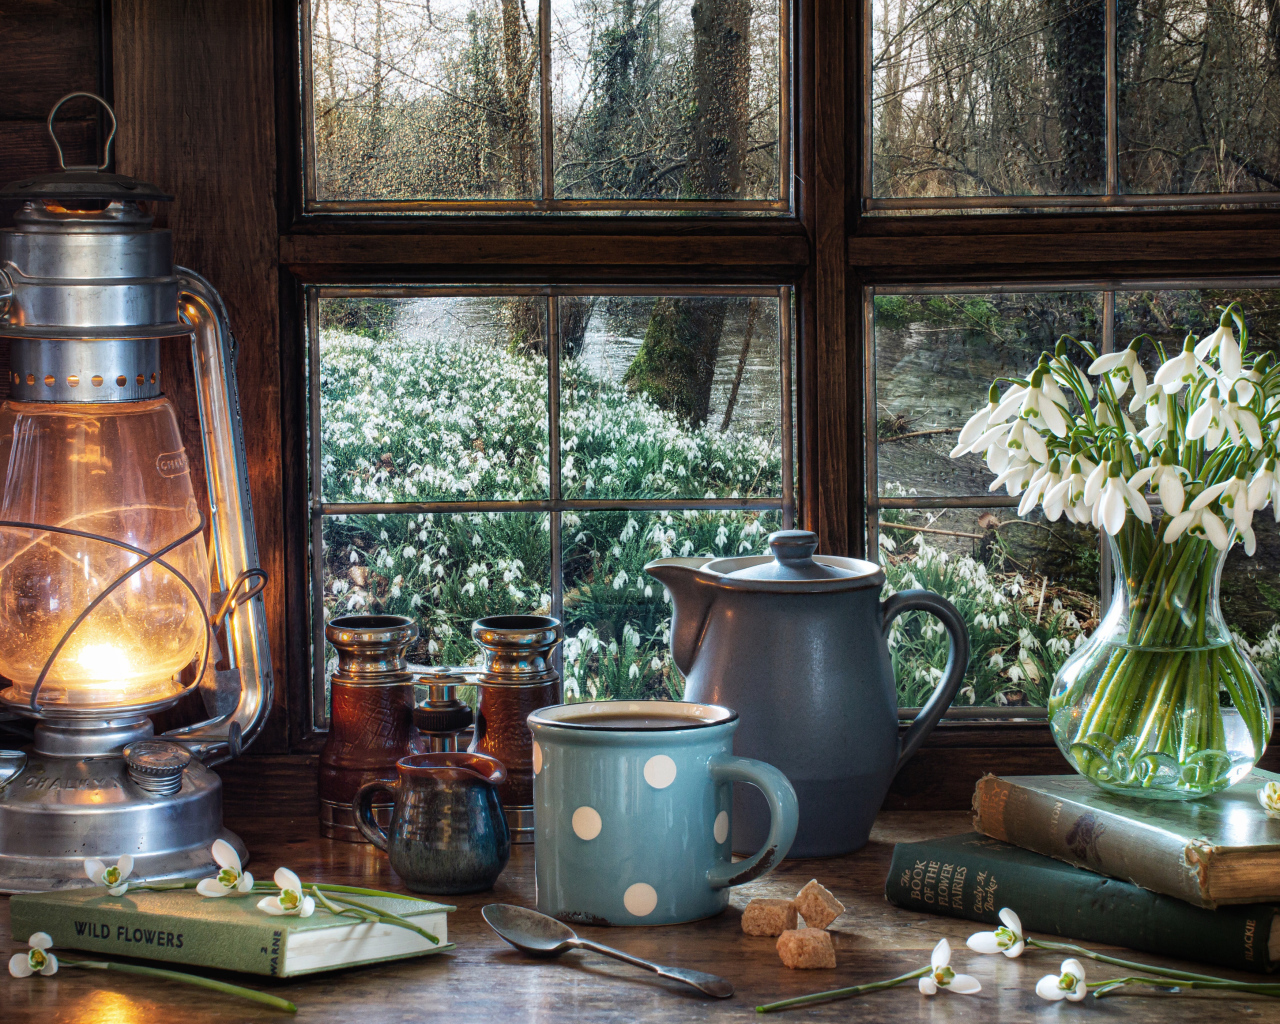 Kerosene lamp on the table with a mug, books and a bouquet of snowdrops by the window